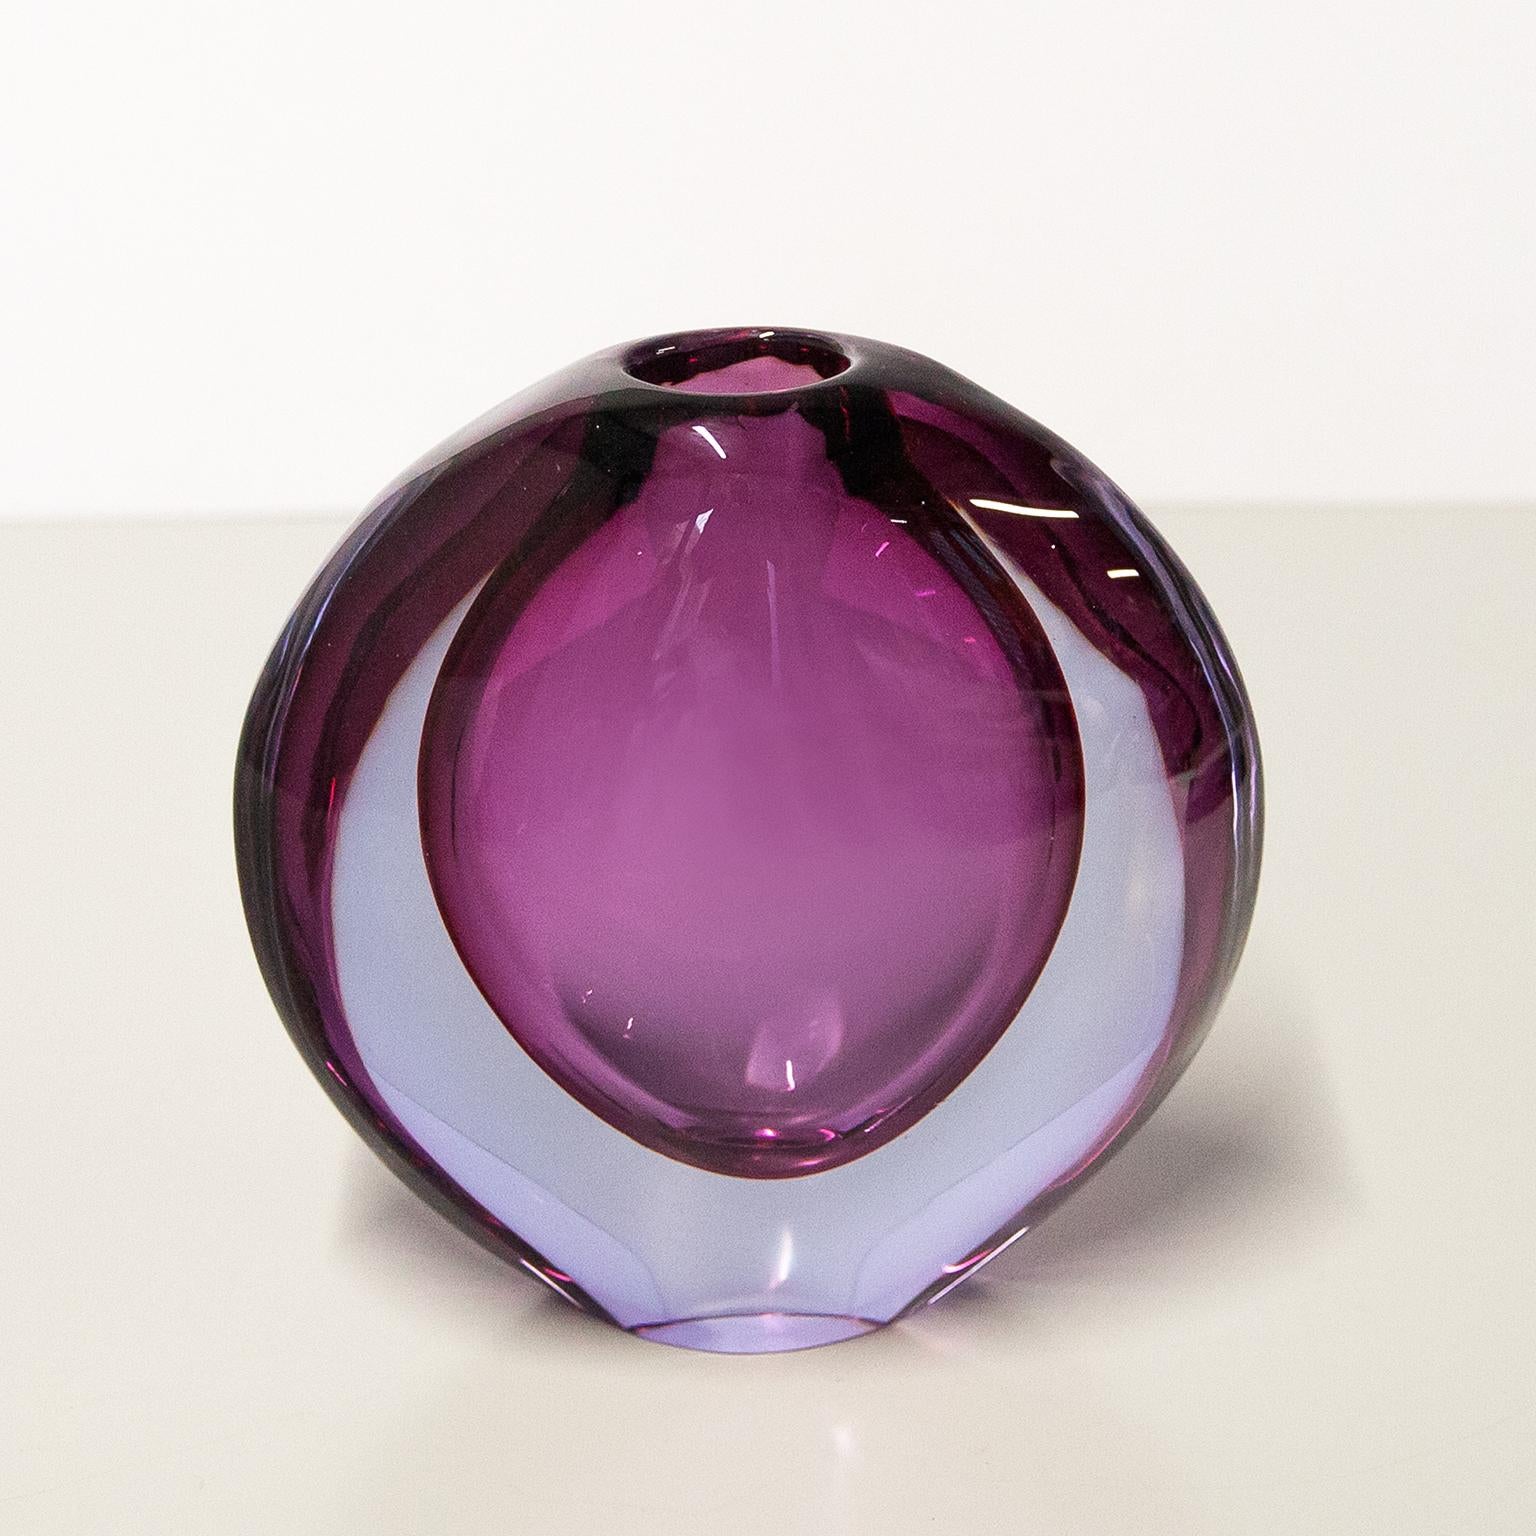 Huge and heavy Flavio Poli Murano Glass Vase in pink, purple and clear Murano Glass. Made for Seguso in the 1960s.